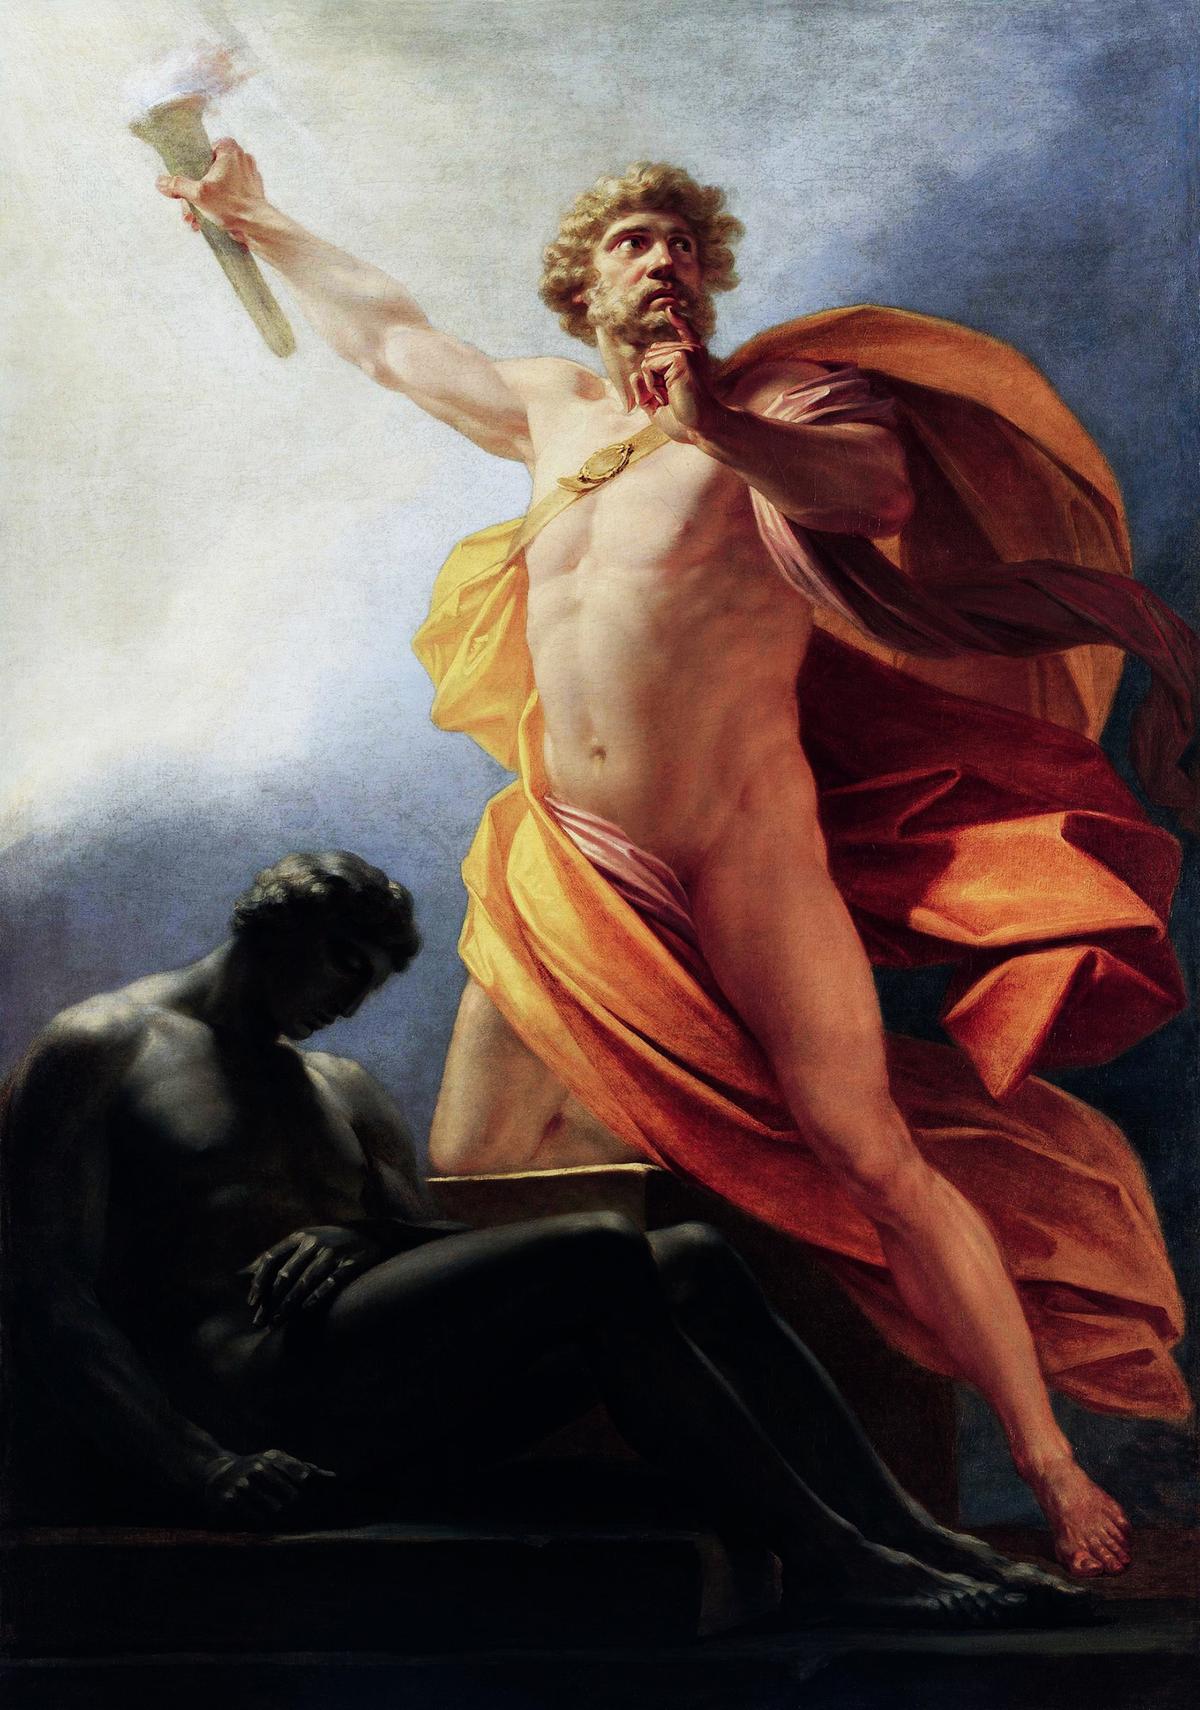 Prometheus’s hubris entailed his stealing fire for man. "Prometheus Brings Fire to Mankind," circa 1817, by Heinrich Fuger. Oil on canvas. (Public Domain)